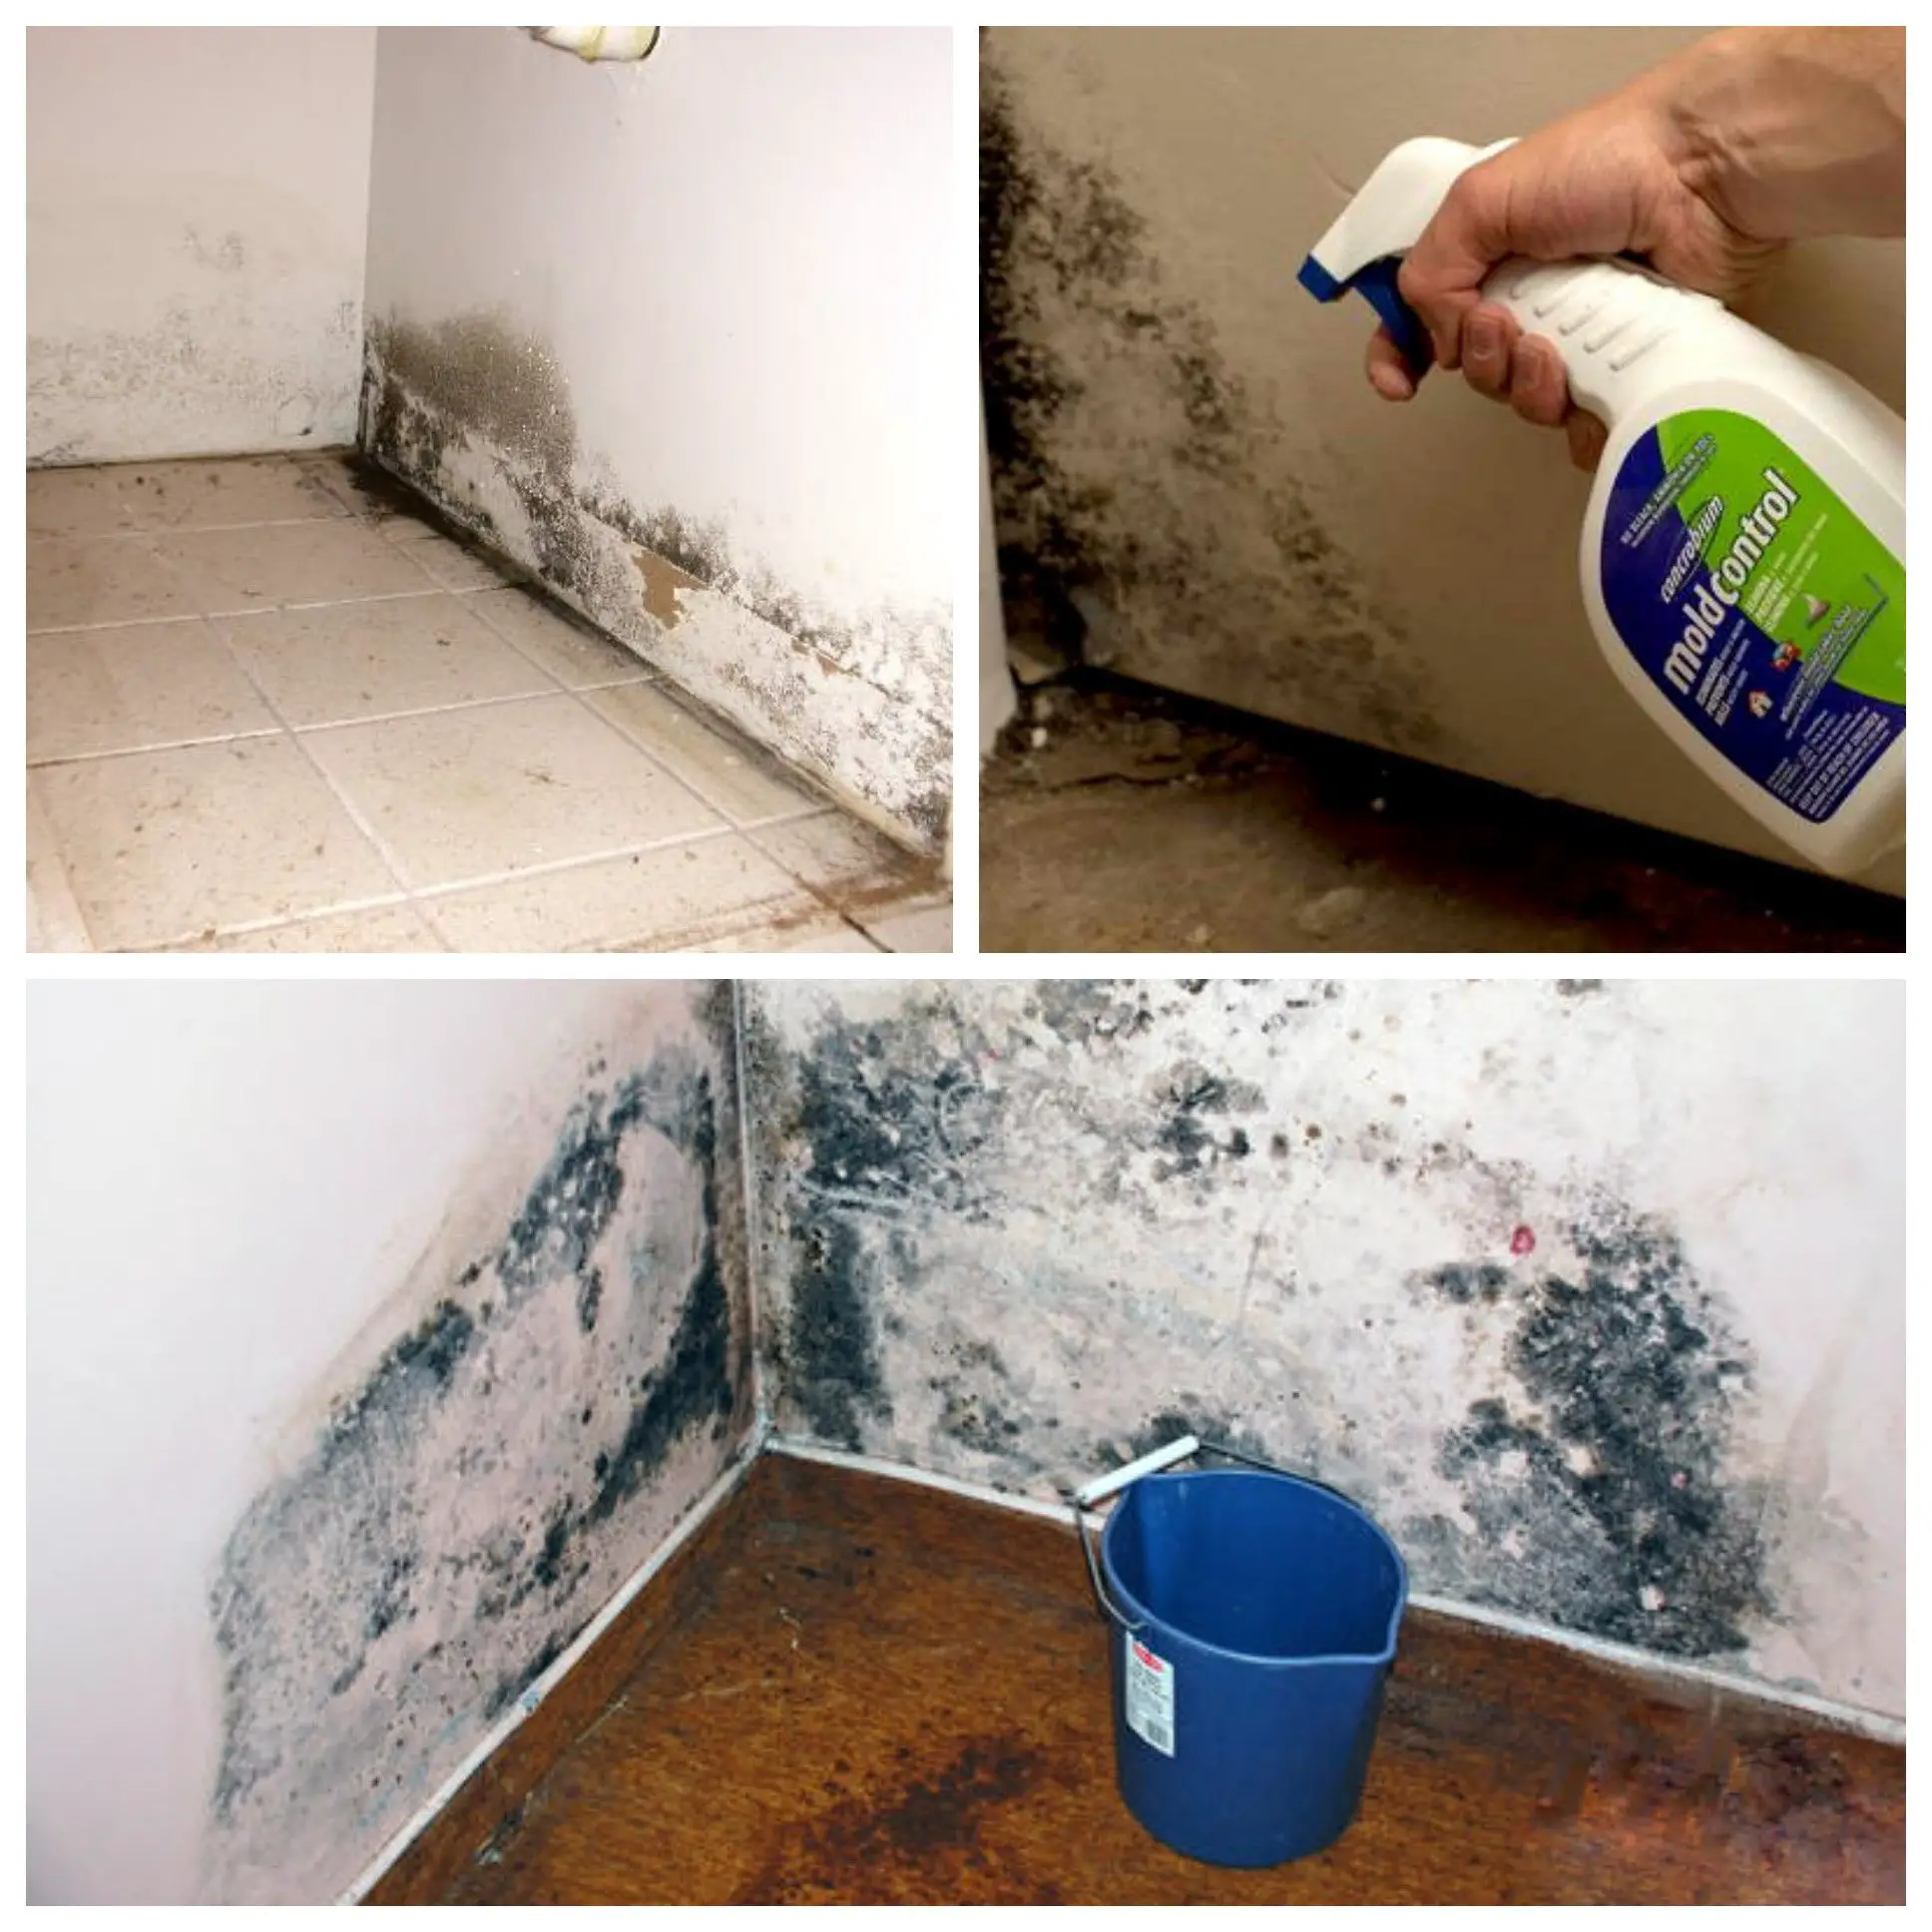 3 Ways To Kill Mold In Your Home Naturally  diyviews.com